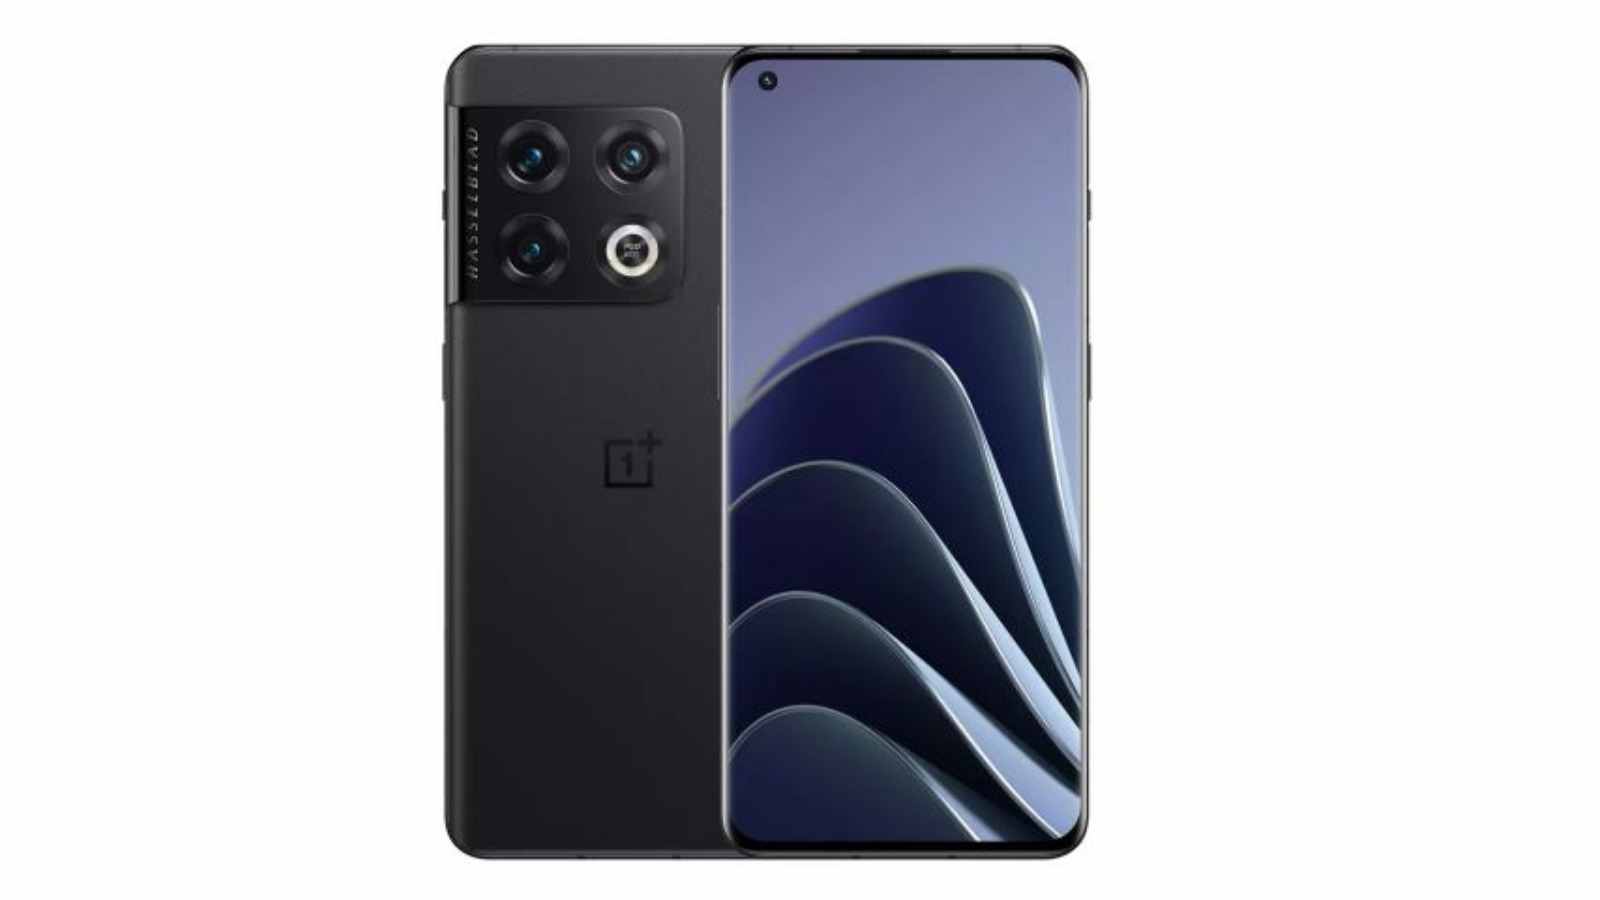 OnePlus 10 Pro with SNapdragon 8 Gen 1 Processor, 120Hz AMOLED display launched: Price, Specifications